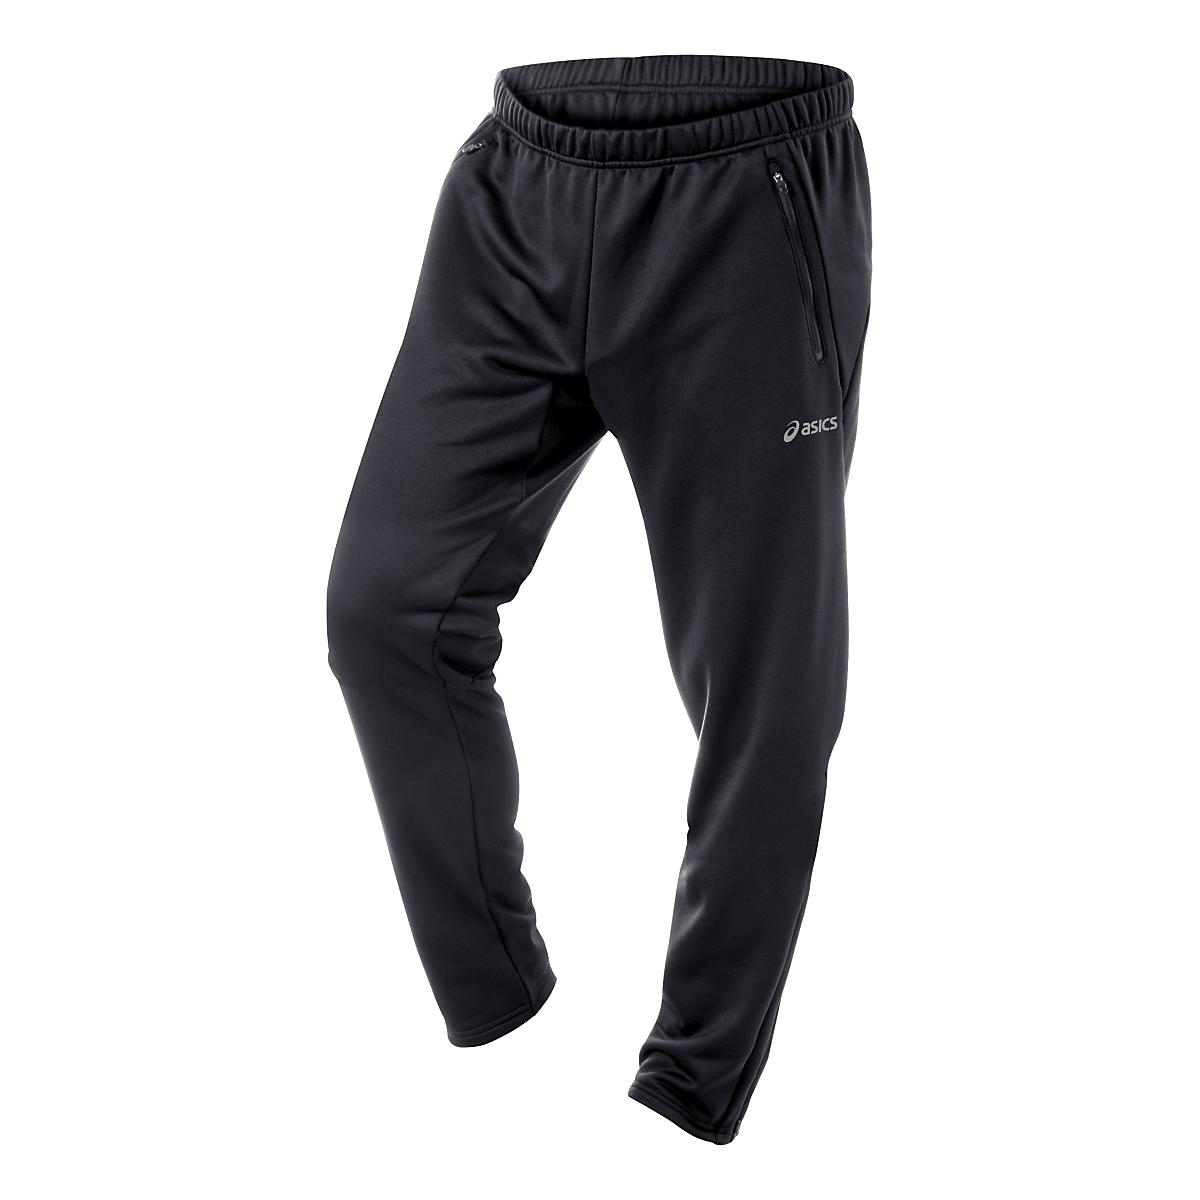 Womens Road Runner Sports Second Wind-Front Cold weather Pants at Road ...